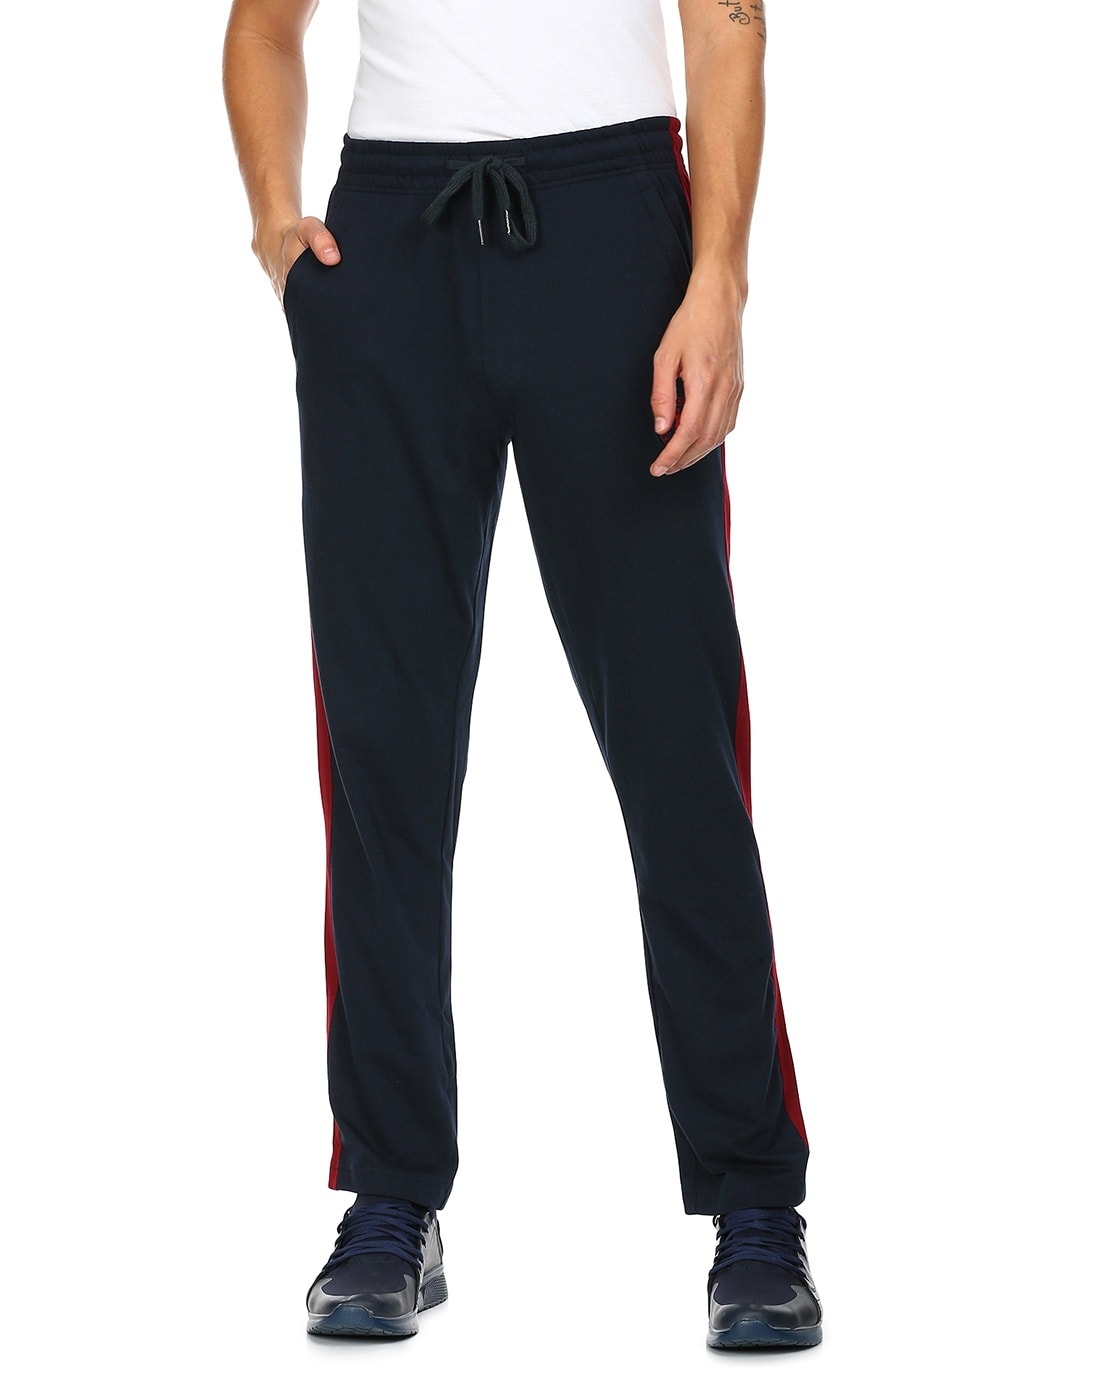 Top 10 Best Track Pants for Men from the Top Brands in India | DesiDime